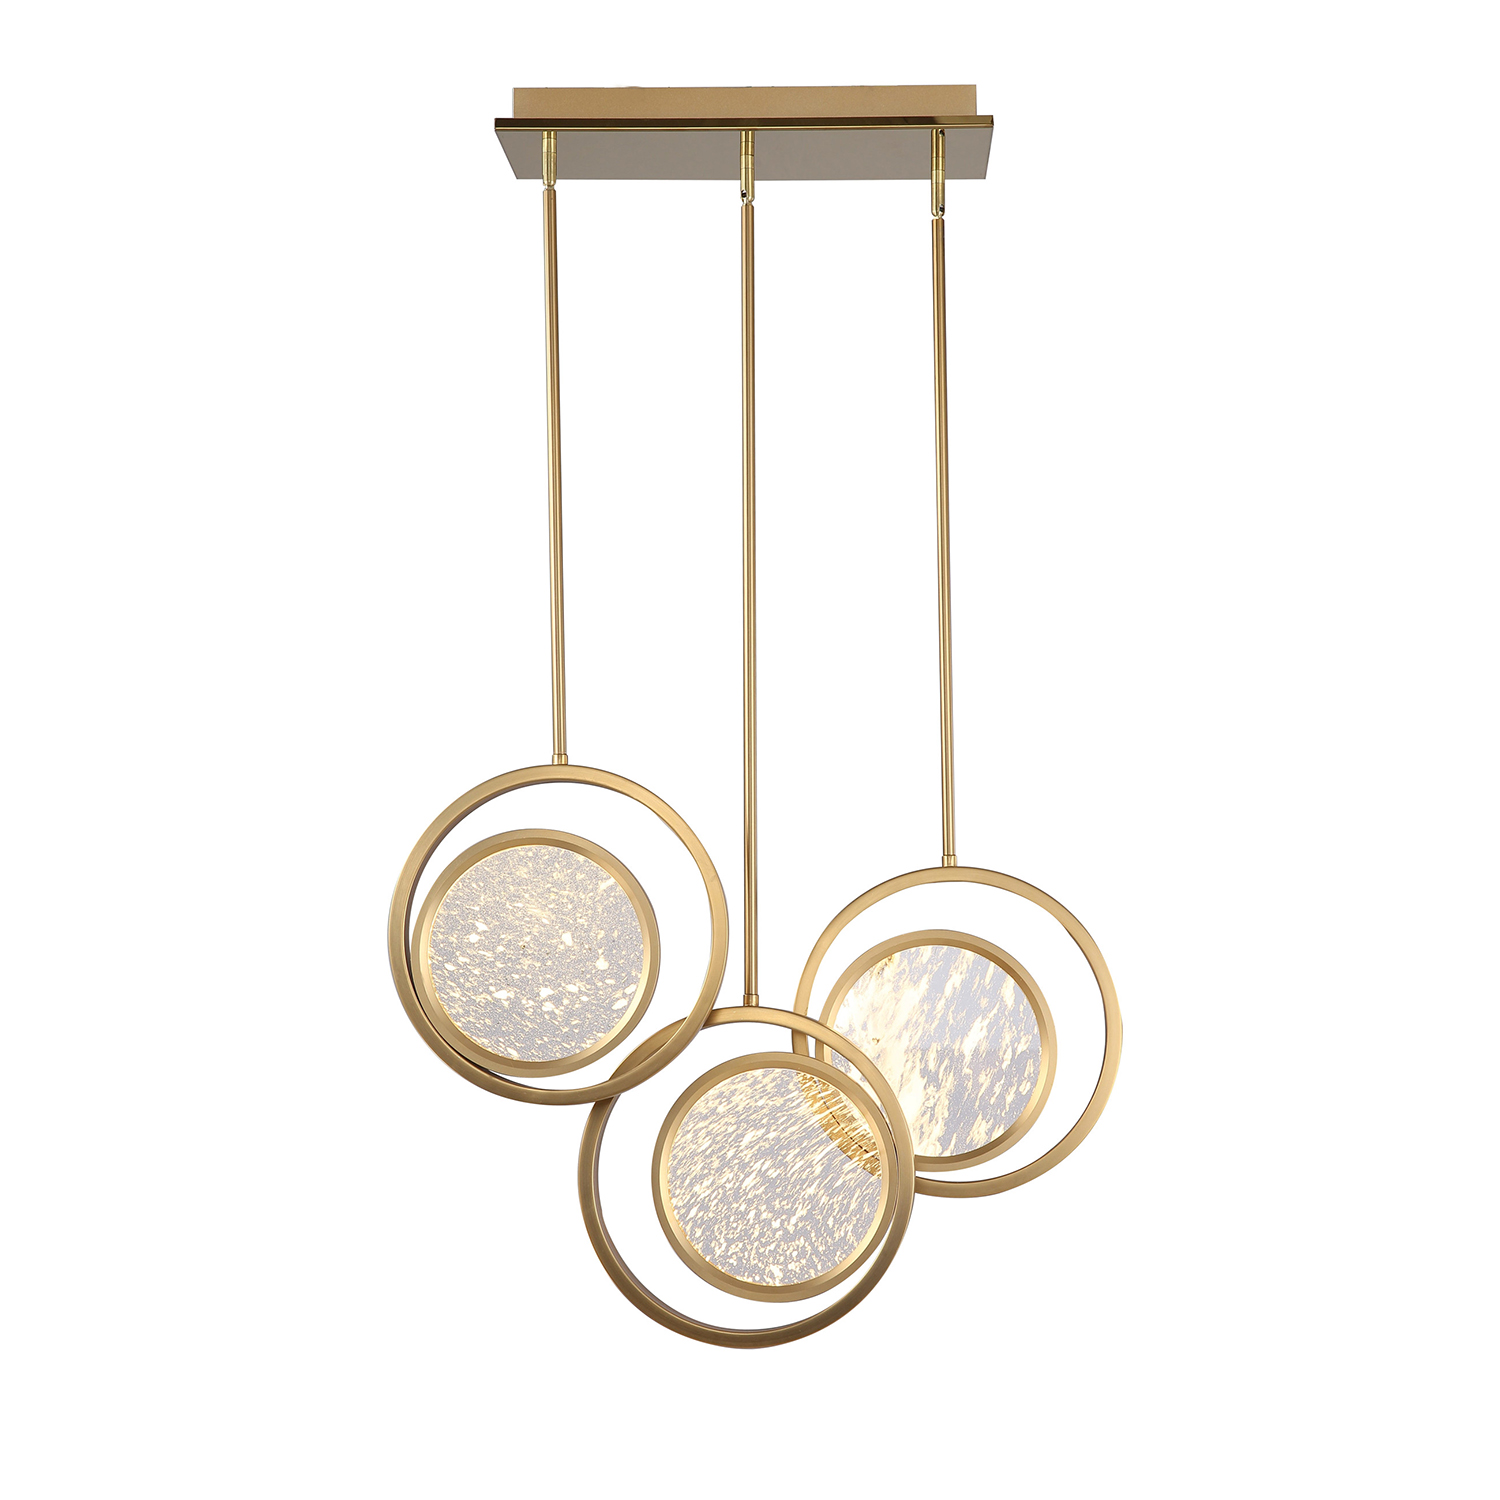 Подвесной светильник Delight collection Moon Light MD8700-3A brushed gold